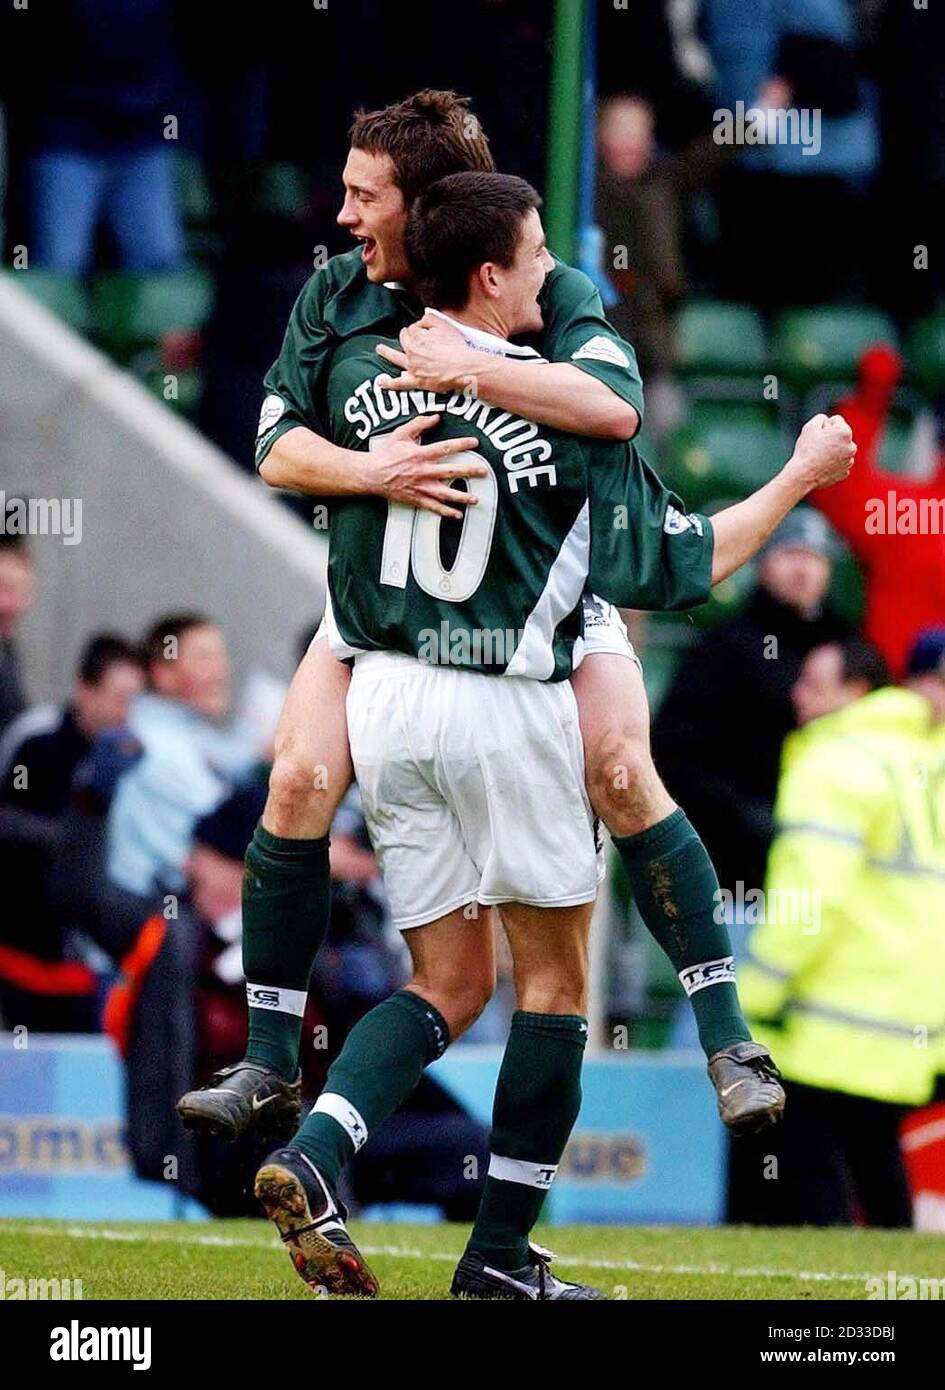 Plymouth Argyle's Ian Stonebridge celebrates with team-mate Peter Gilbert after scoring the winning goal against Port Vale during their Nationwide Division Two match at Plymouth's Home Park ground  THIS PICTURE CAN ONLY BE USED WITHIN THE CONTEXT OF AN EDITORIAL FEATURE. NO UNOFFICIAL CLUB WEBSITE USE. Stock Photo